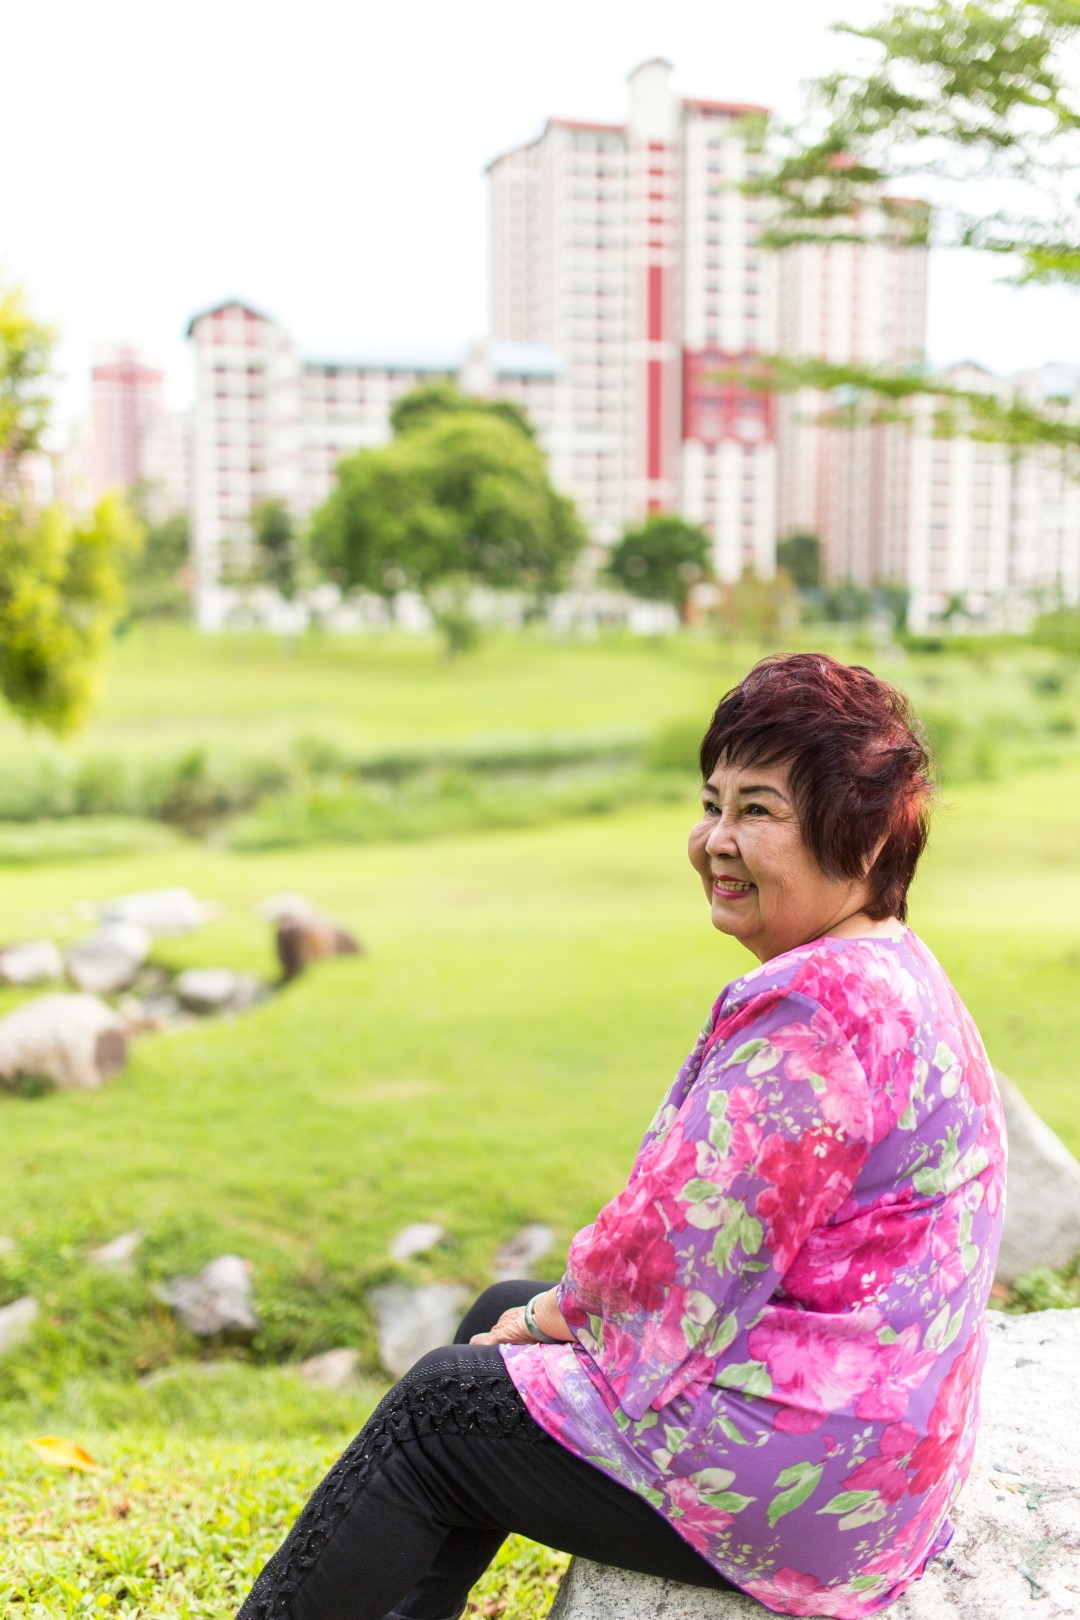 For Madam Yoo, being happy is to be healthy and not having to rely on others. 